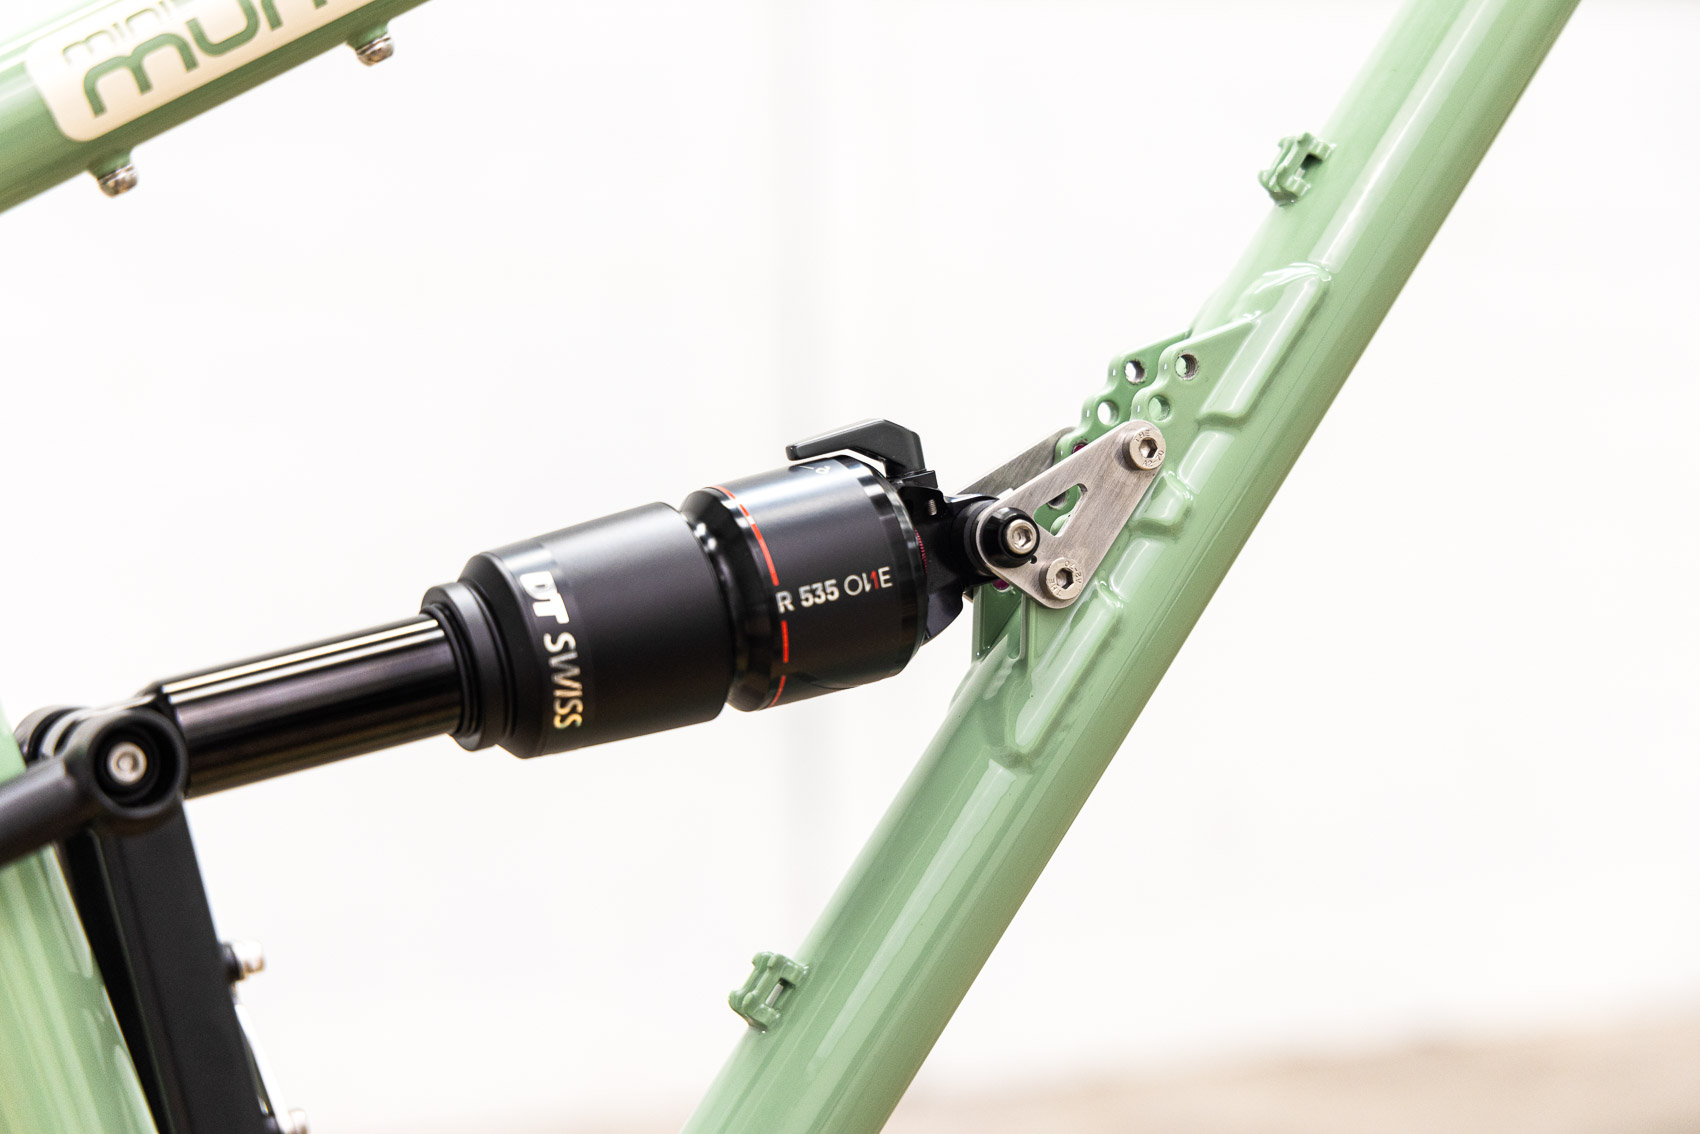 Close up of the DT Swiss R535 One shock